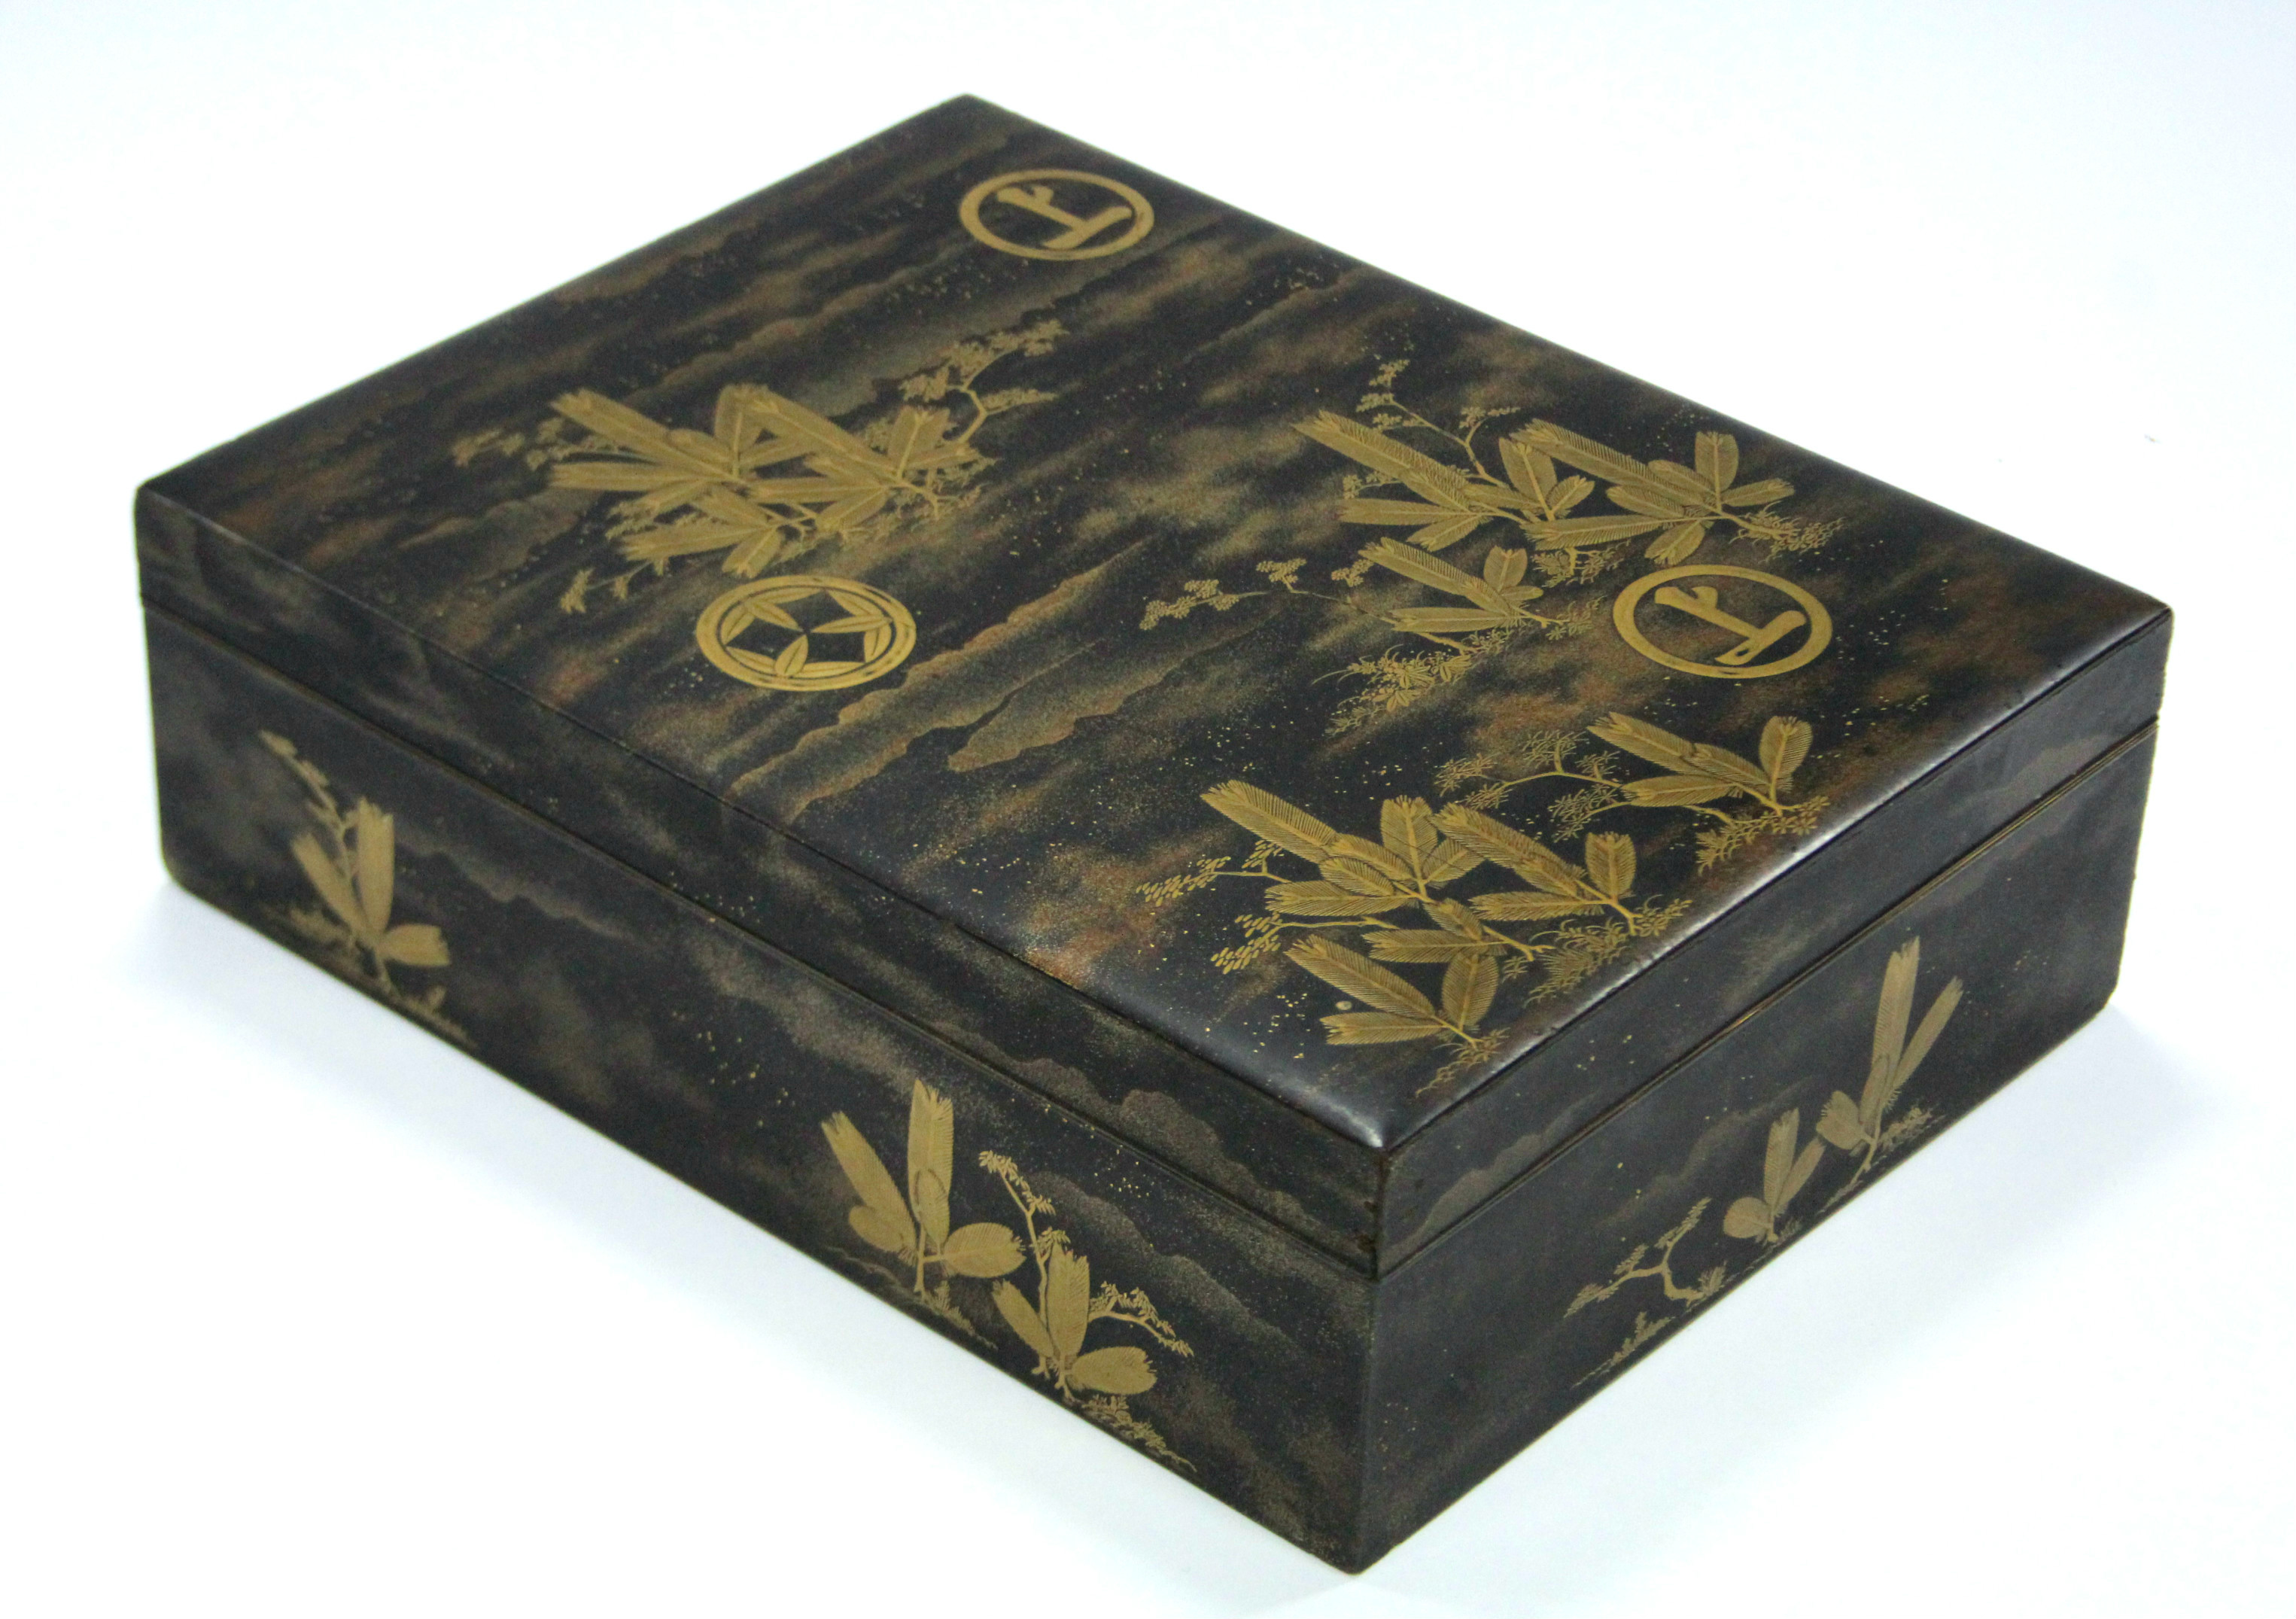 A JAPANESE LACQUER RECTANGULAR BOX with removable lid, the exterior & interior decorated in